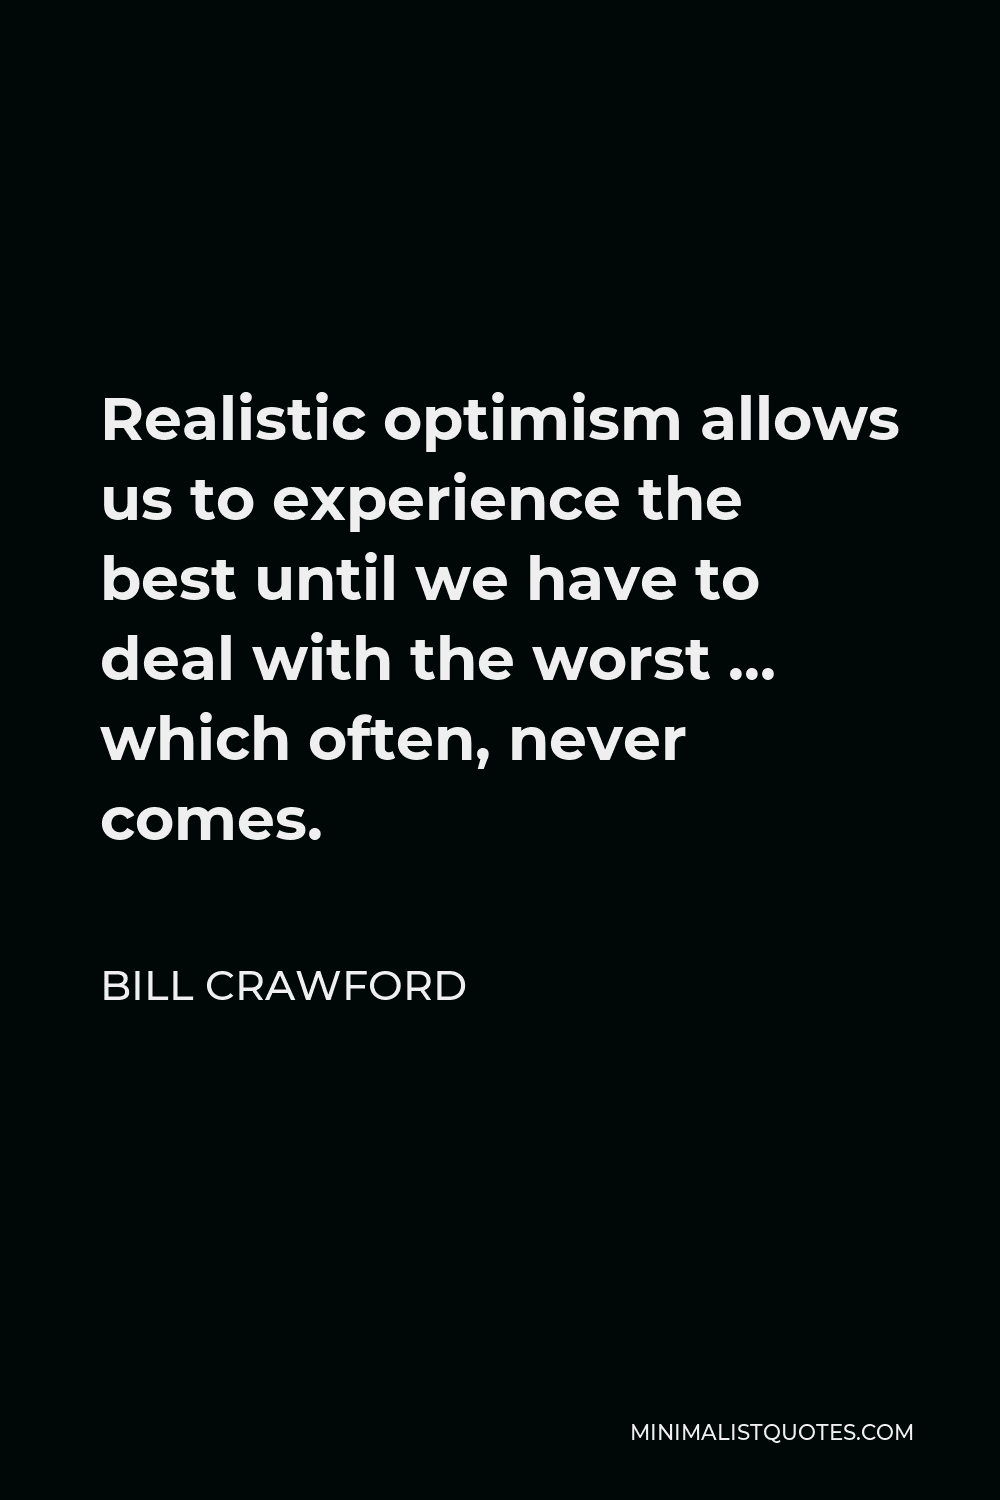 Bill Crawford Quote - Realistic optimism allows us to experience the best until we have to deal with the worst … which often, never comes.